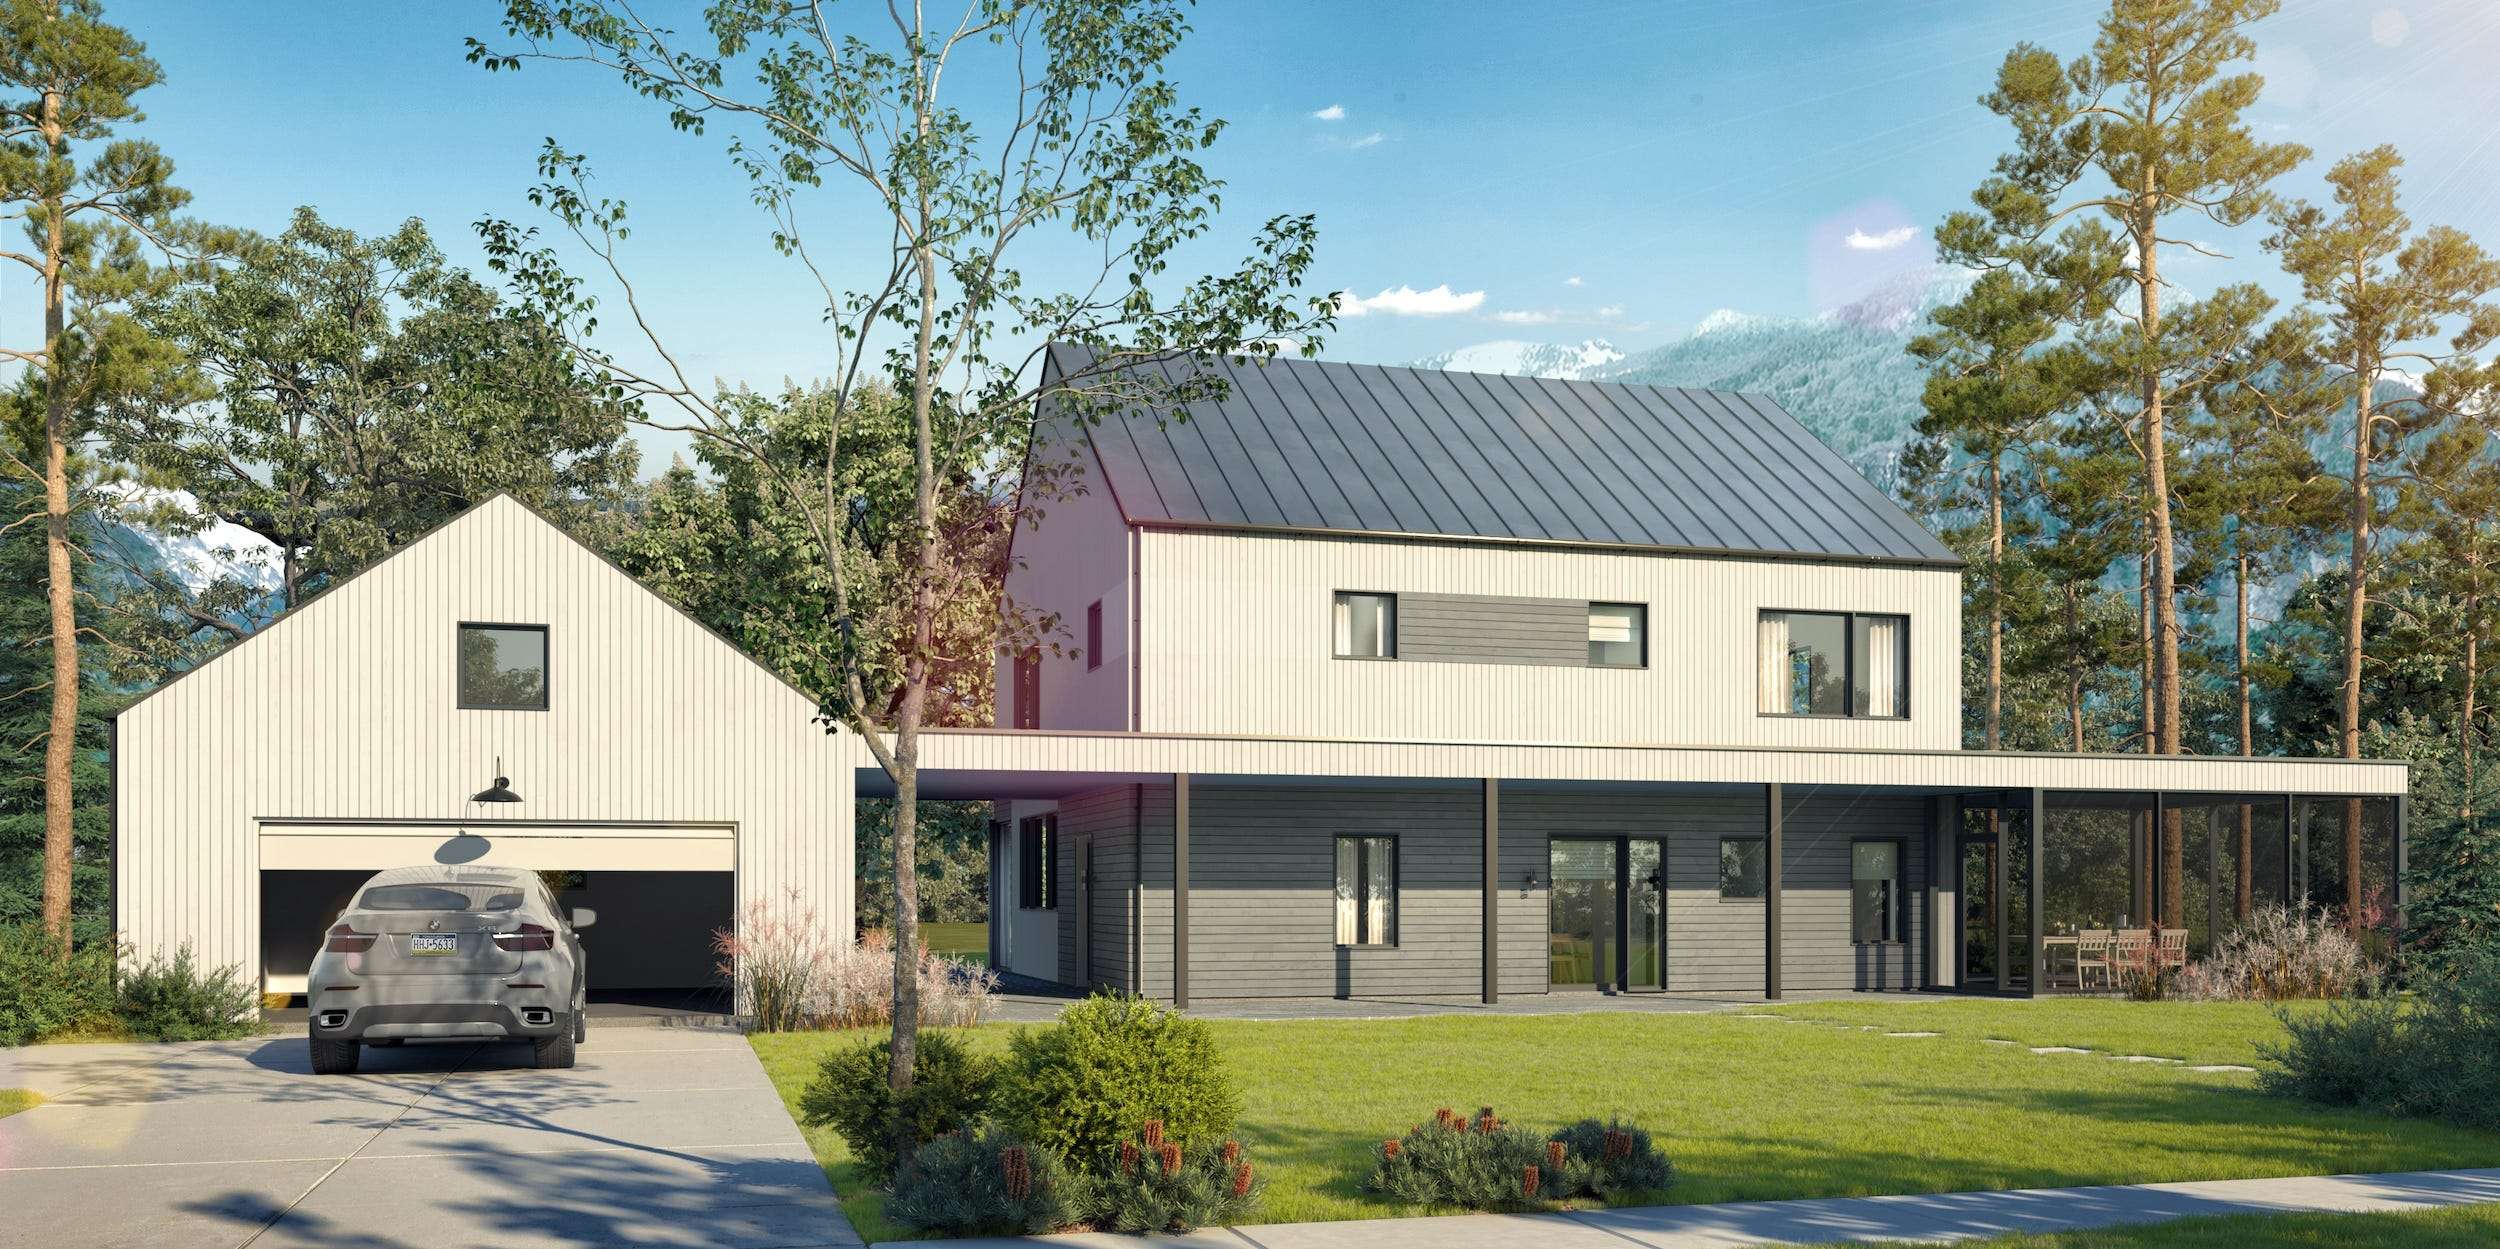 A company that makes $600,000 prefab smart homes got so popular in 2020 it had to turn away customers  - see inside its 3 new homes